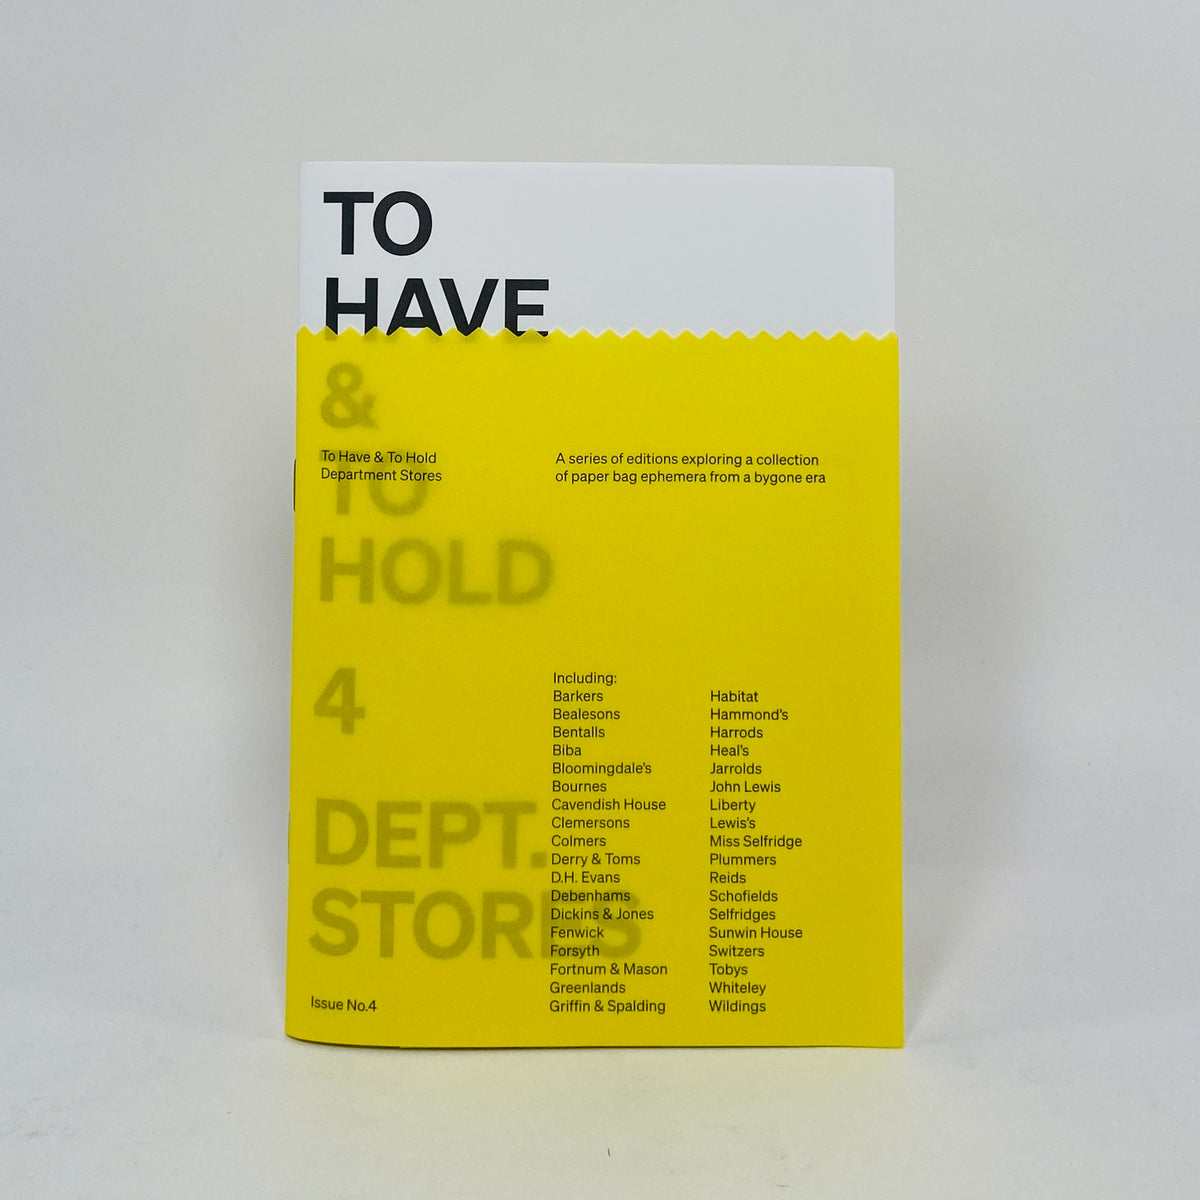 To Have & To Hold #3 - Department Stores